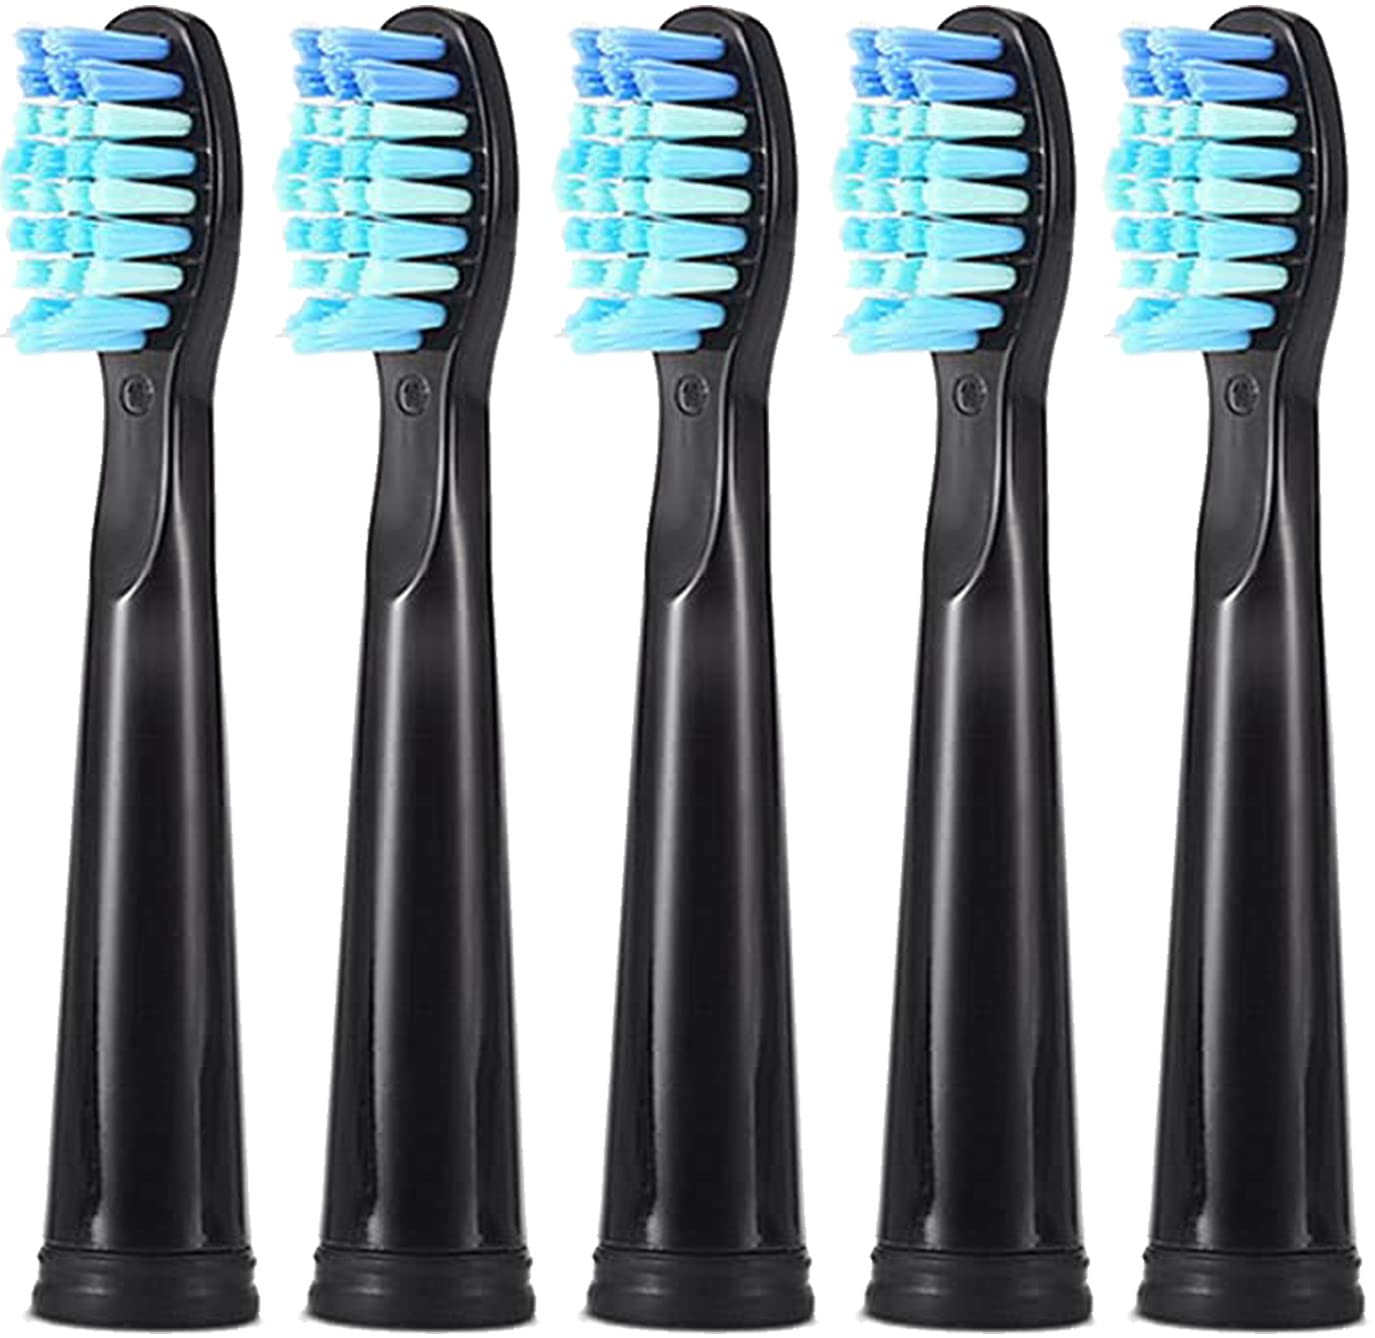 5pc Toothbrush Heads Compatible with Fairywill D7/D8/FW507/508, FW551/917/959/D1/D3-Black